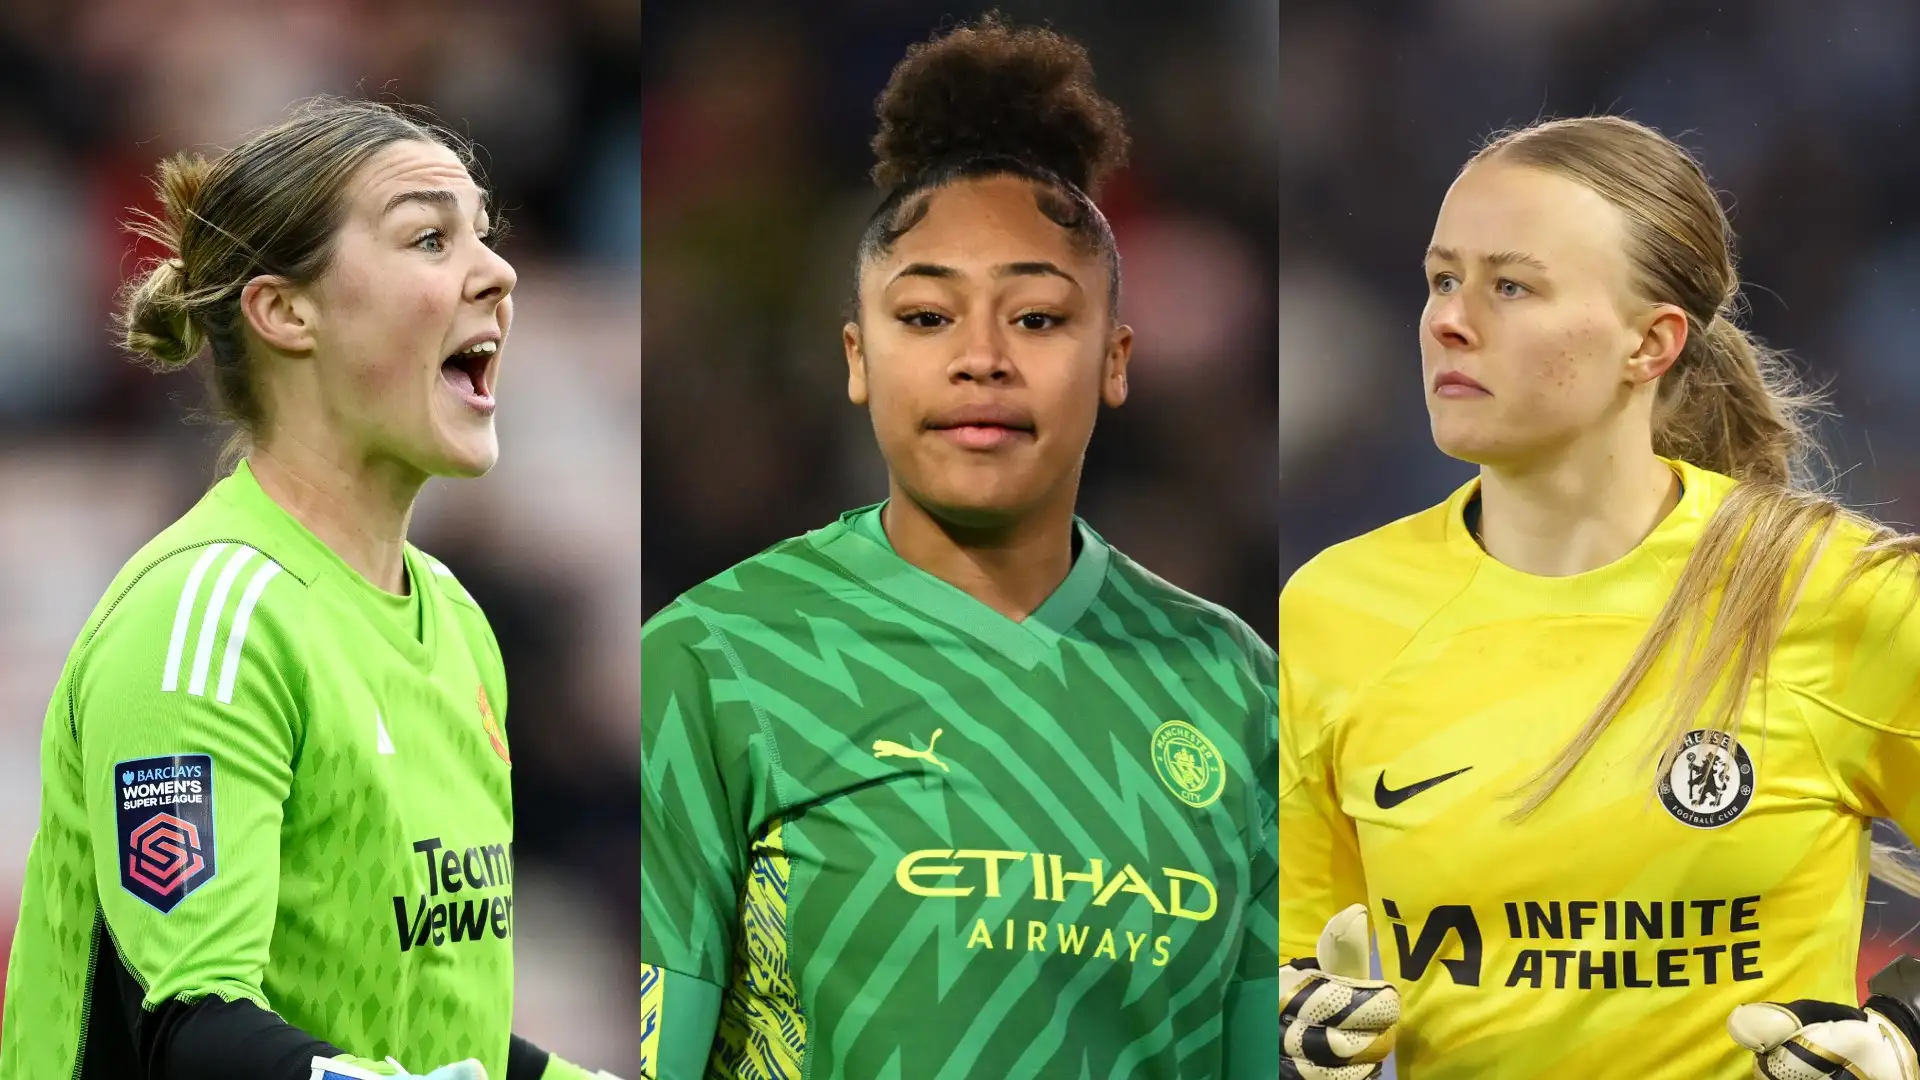 Record-breaker! Man City star Khiara Keating beats fellow Lionesses Mary Earps and Hannah Hampton to WSL Golden Glove award and becomes youngest-ever recipient